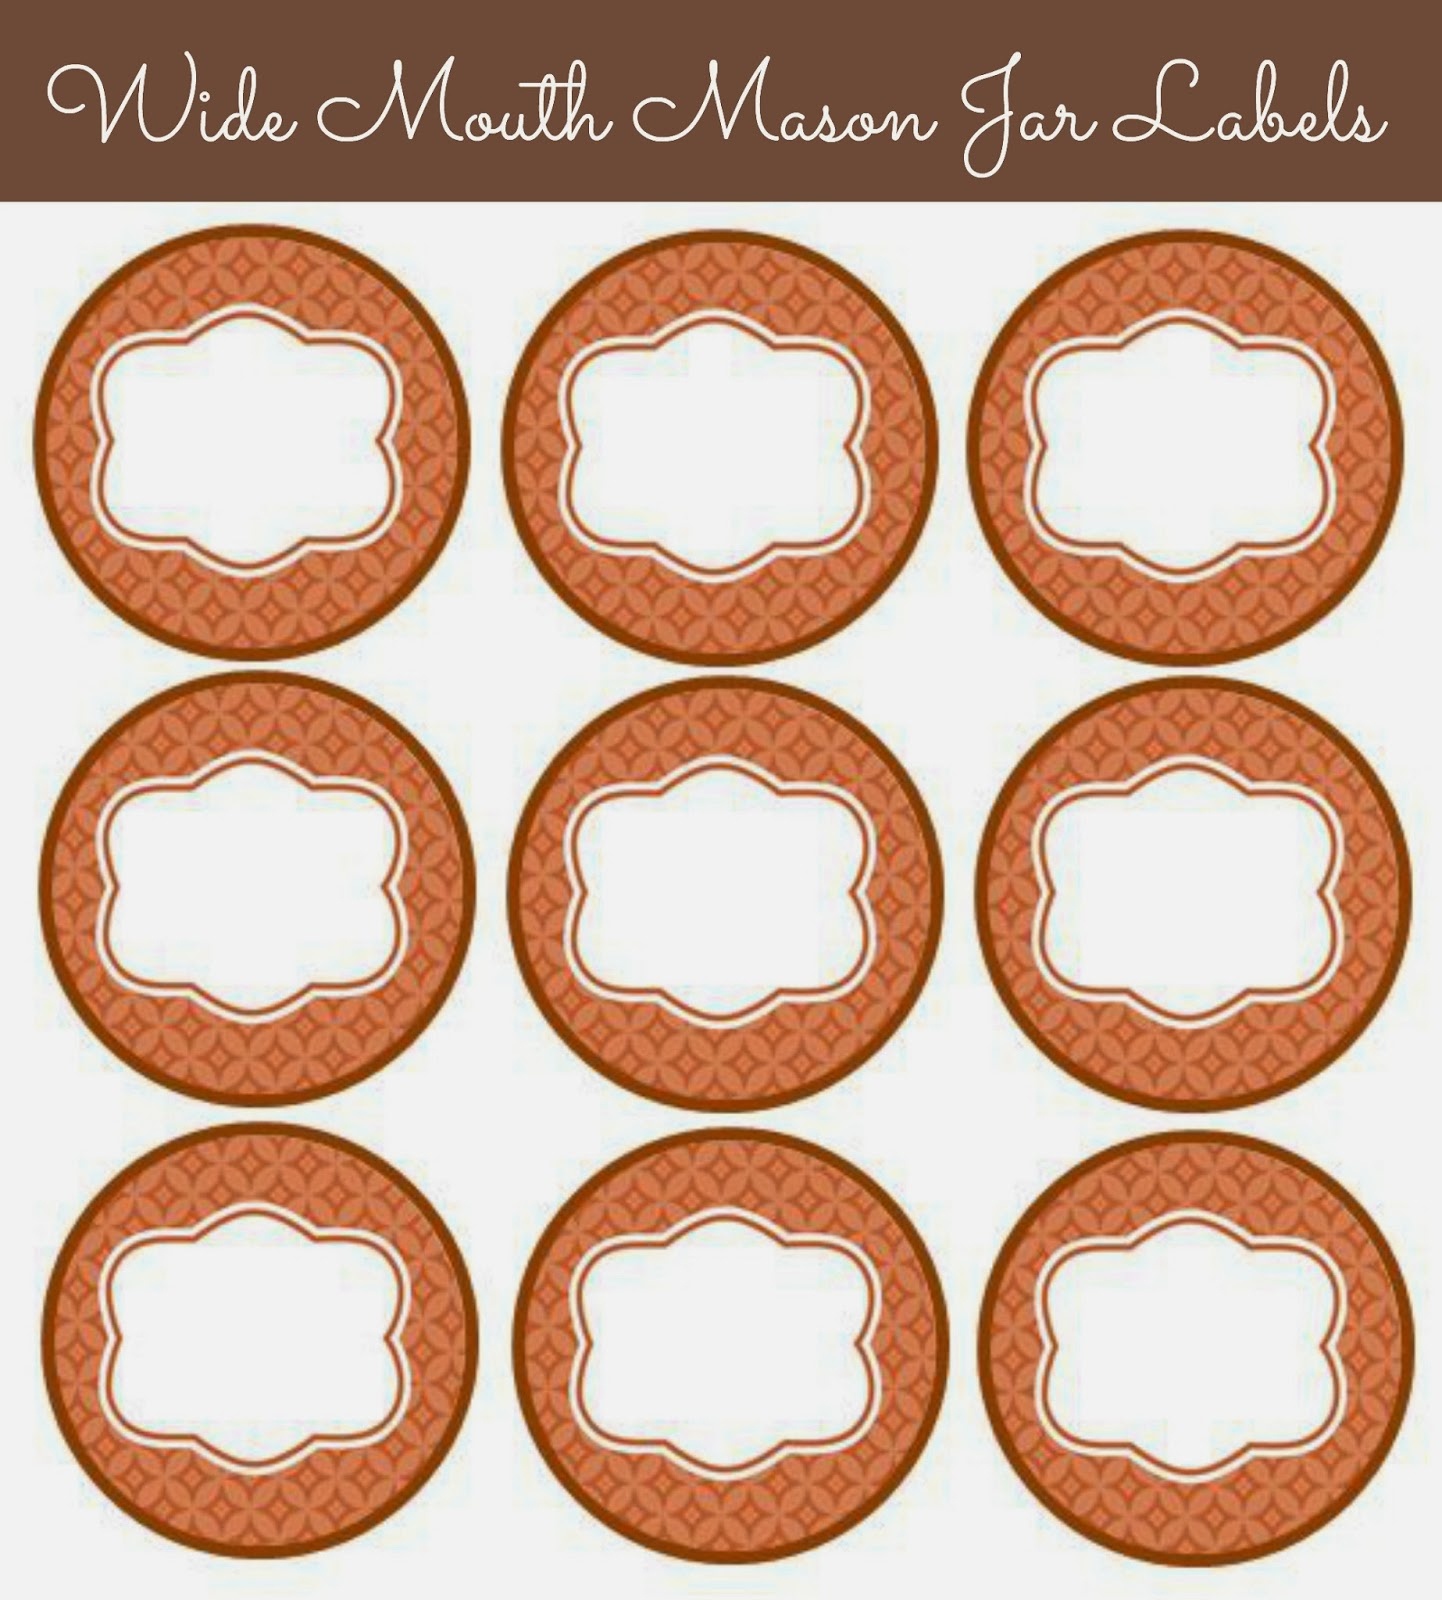 56 Cute Mason Jar Labels | Kittybabylove - Free Printable Labels For Jars